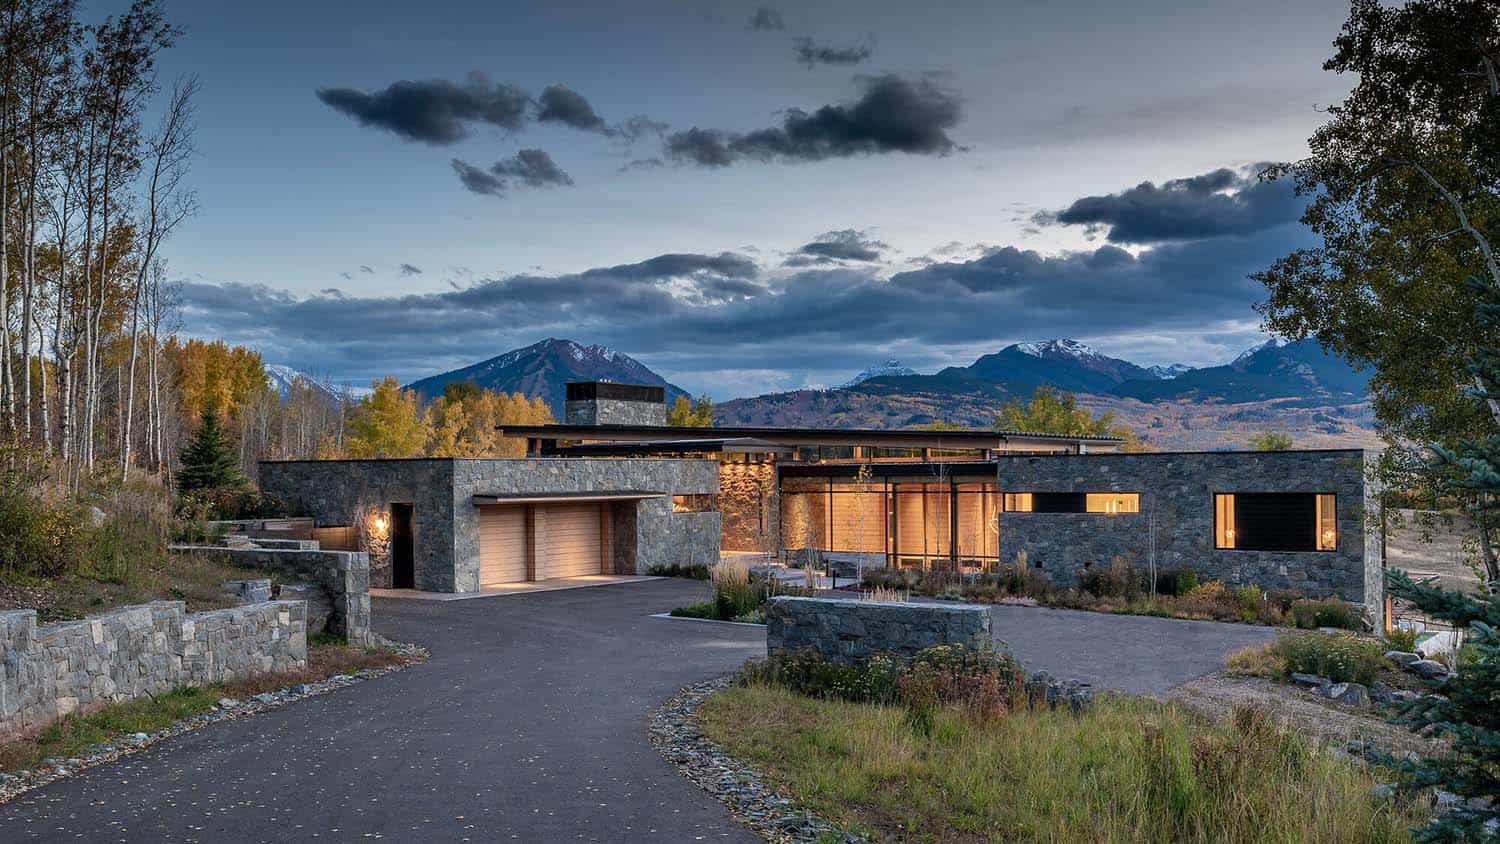 This thrilling Colorado mountain home embraces the natural topography